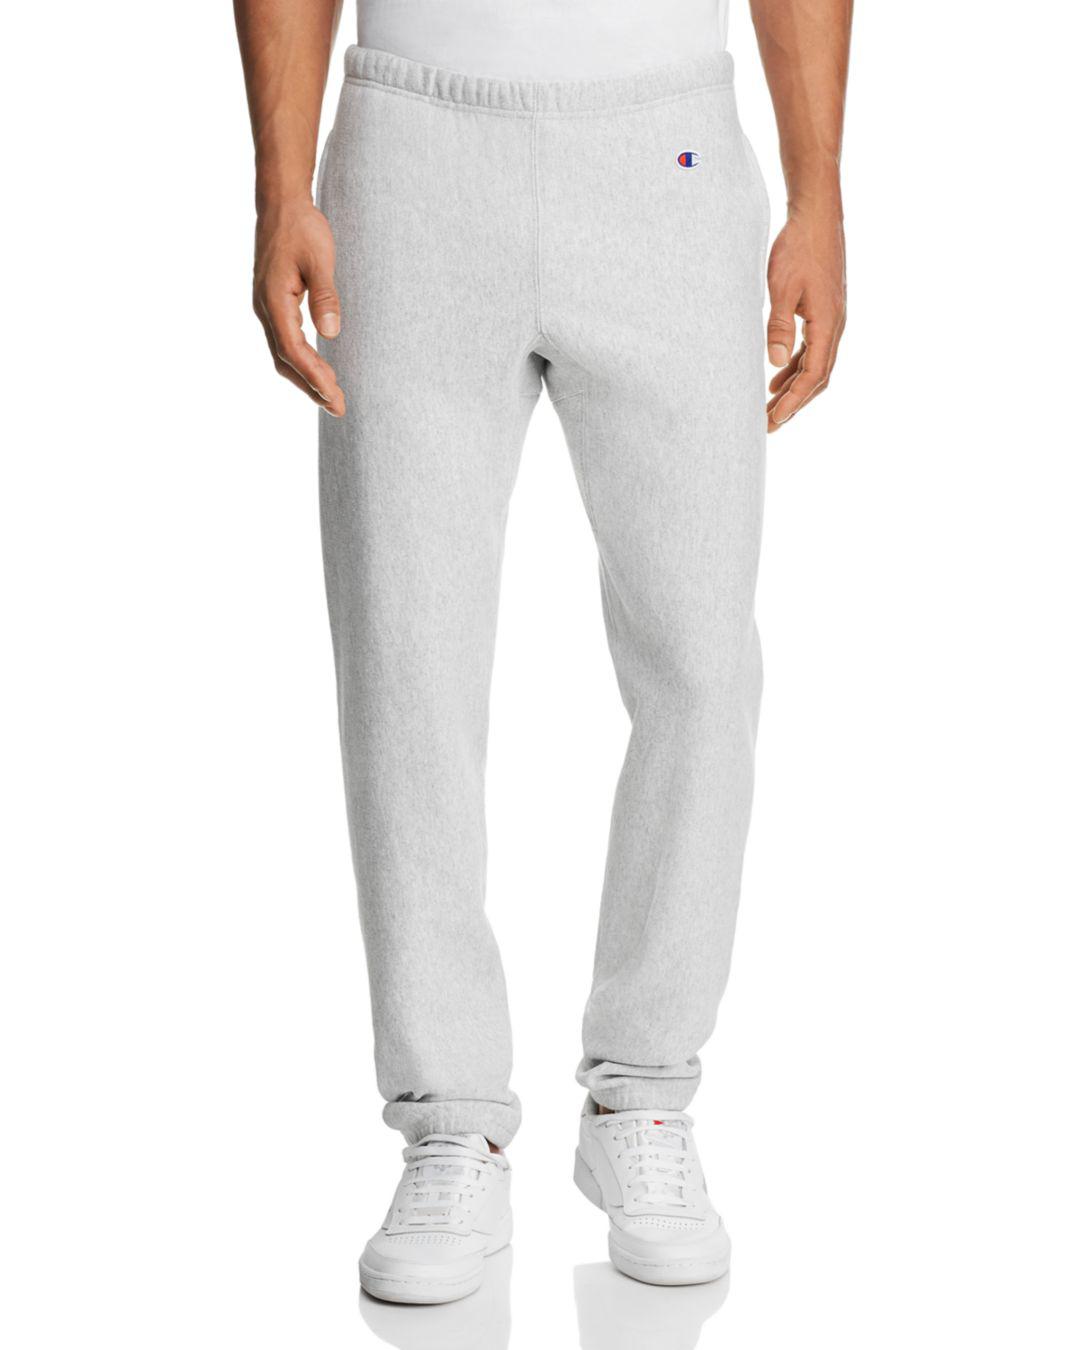 Champion Classic Sweatpants in Heather Grey (Gray) for Men - Lyst